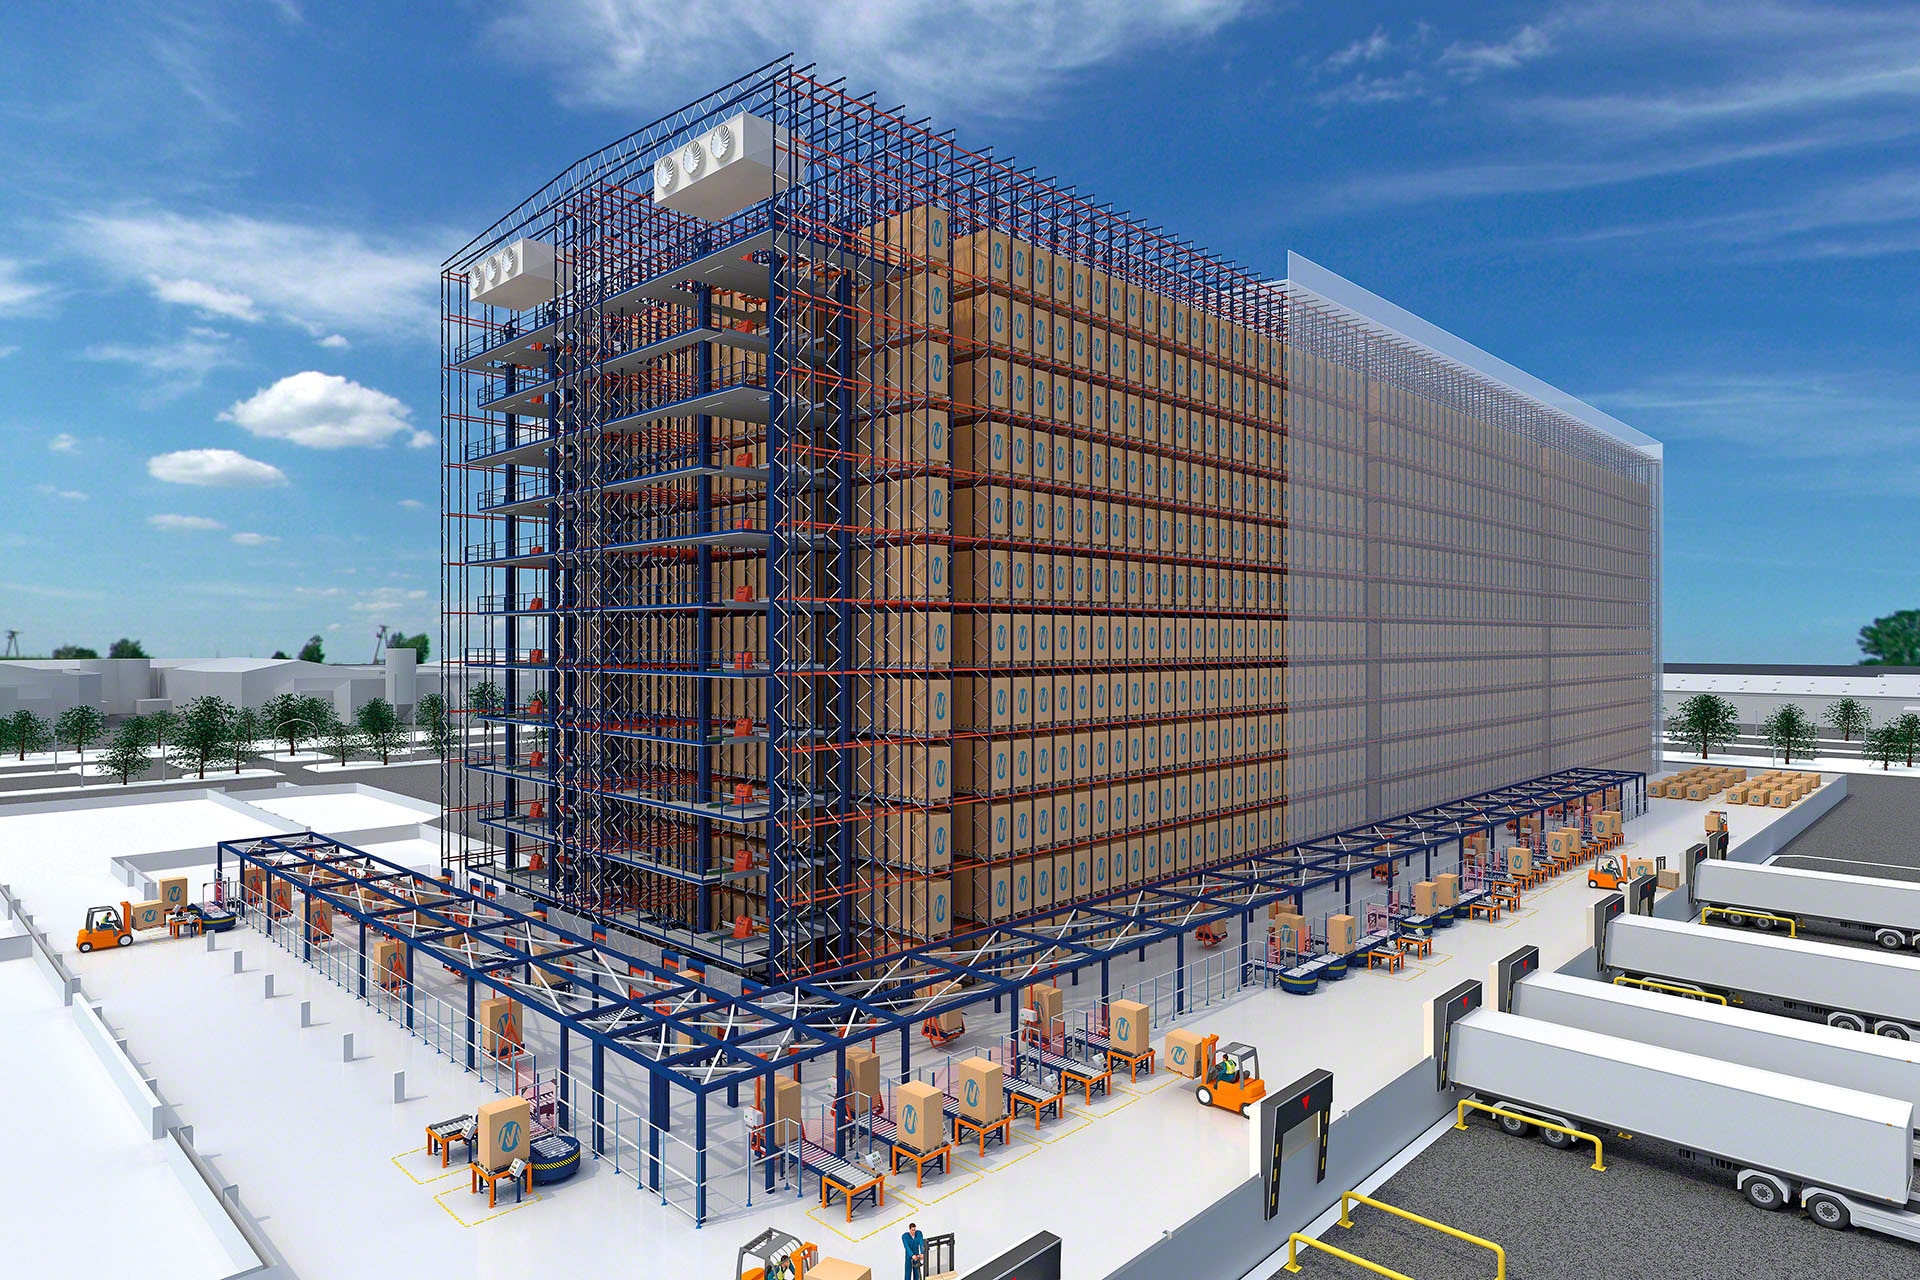 The automated Pallet Shuttle ensures energy savings in cold storage warehouses